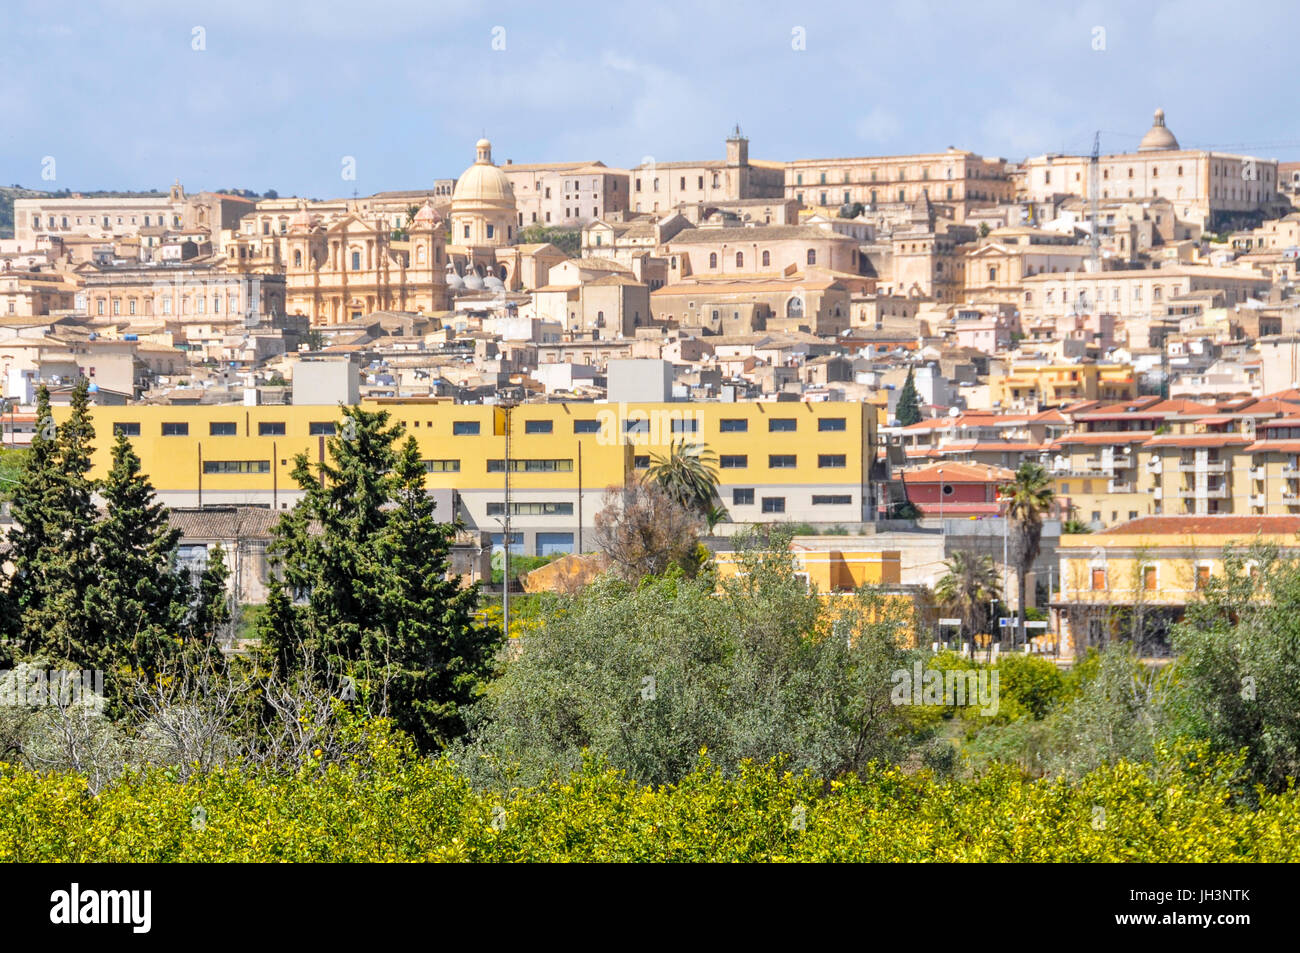 Panoramic view of Noto and its baroque architecture in Sicily, Italy. Stock Photo